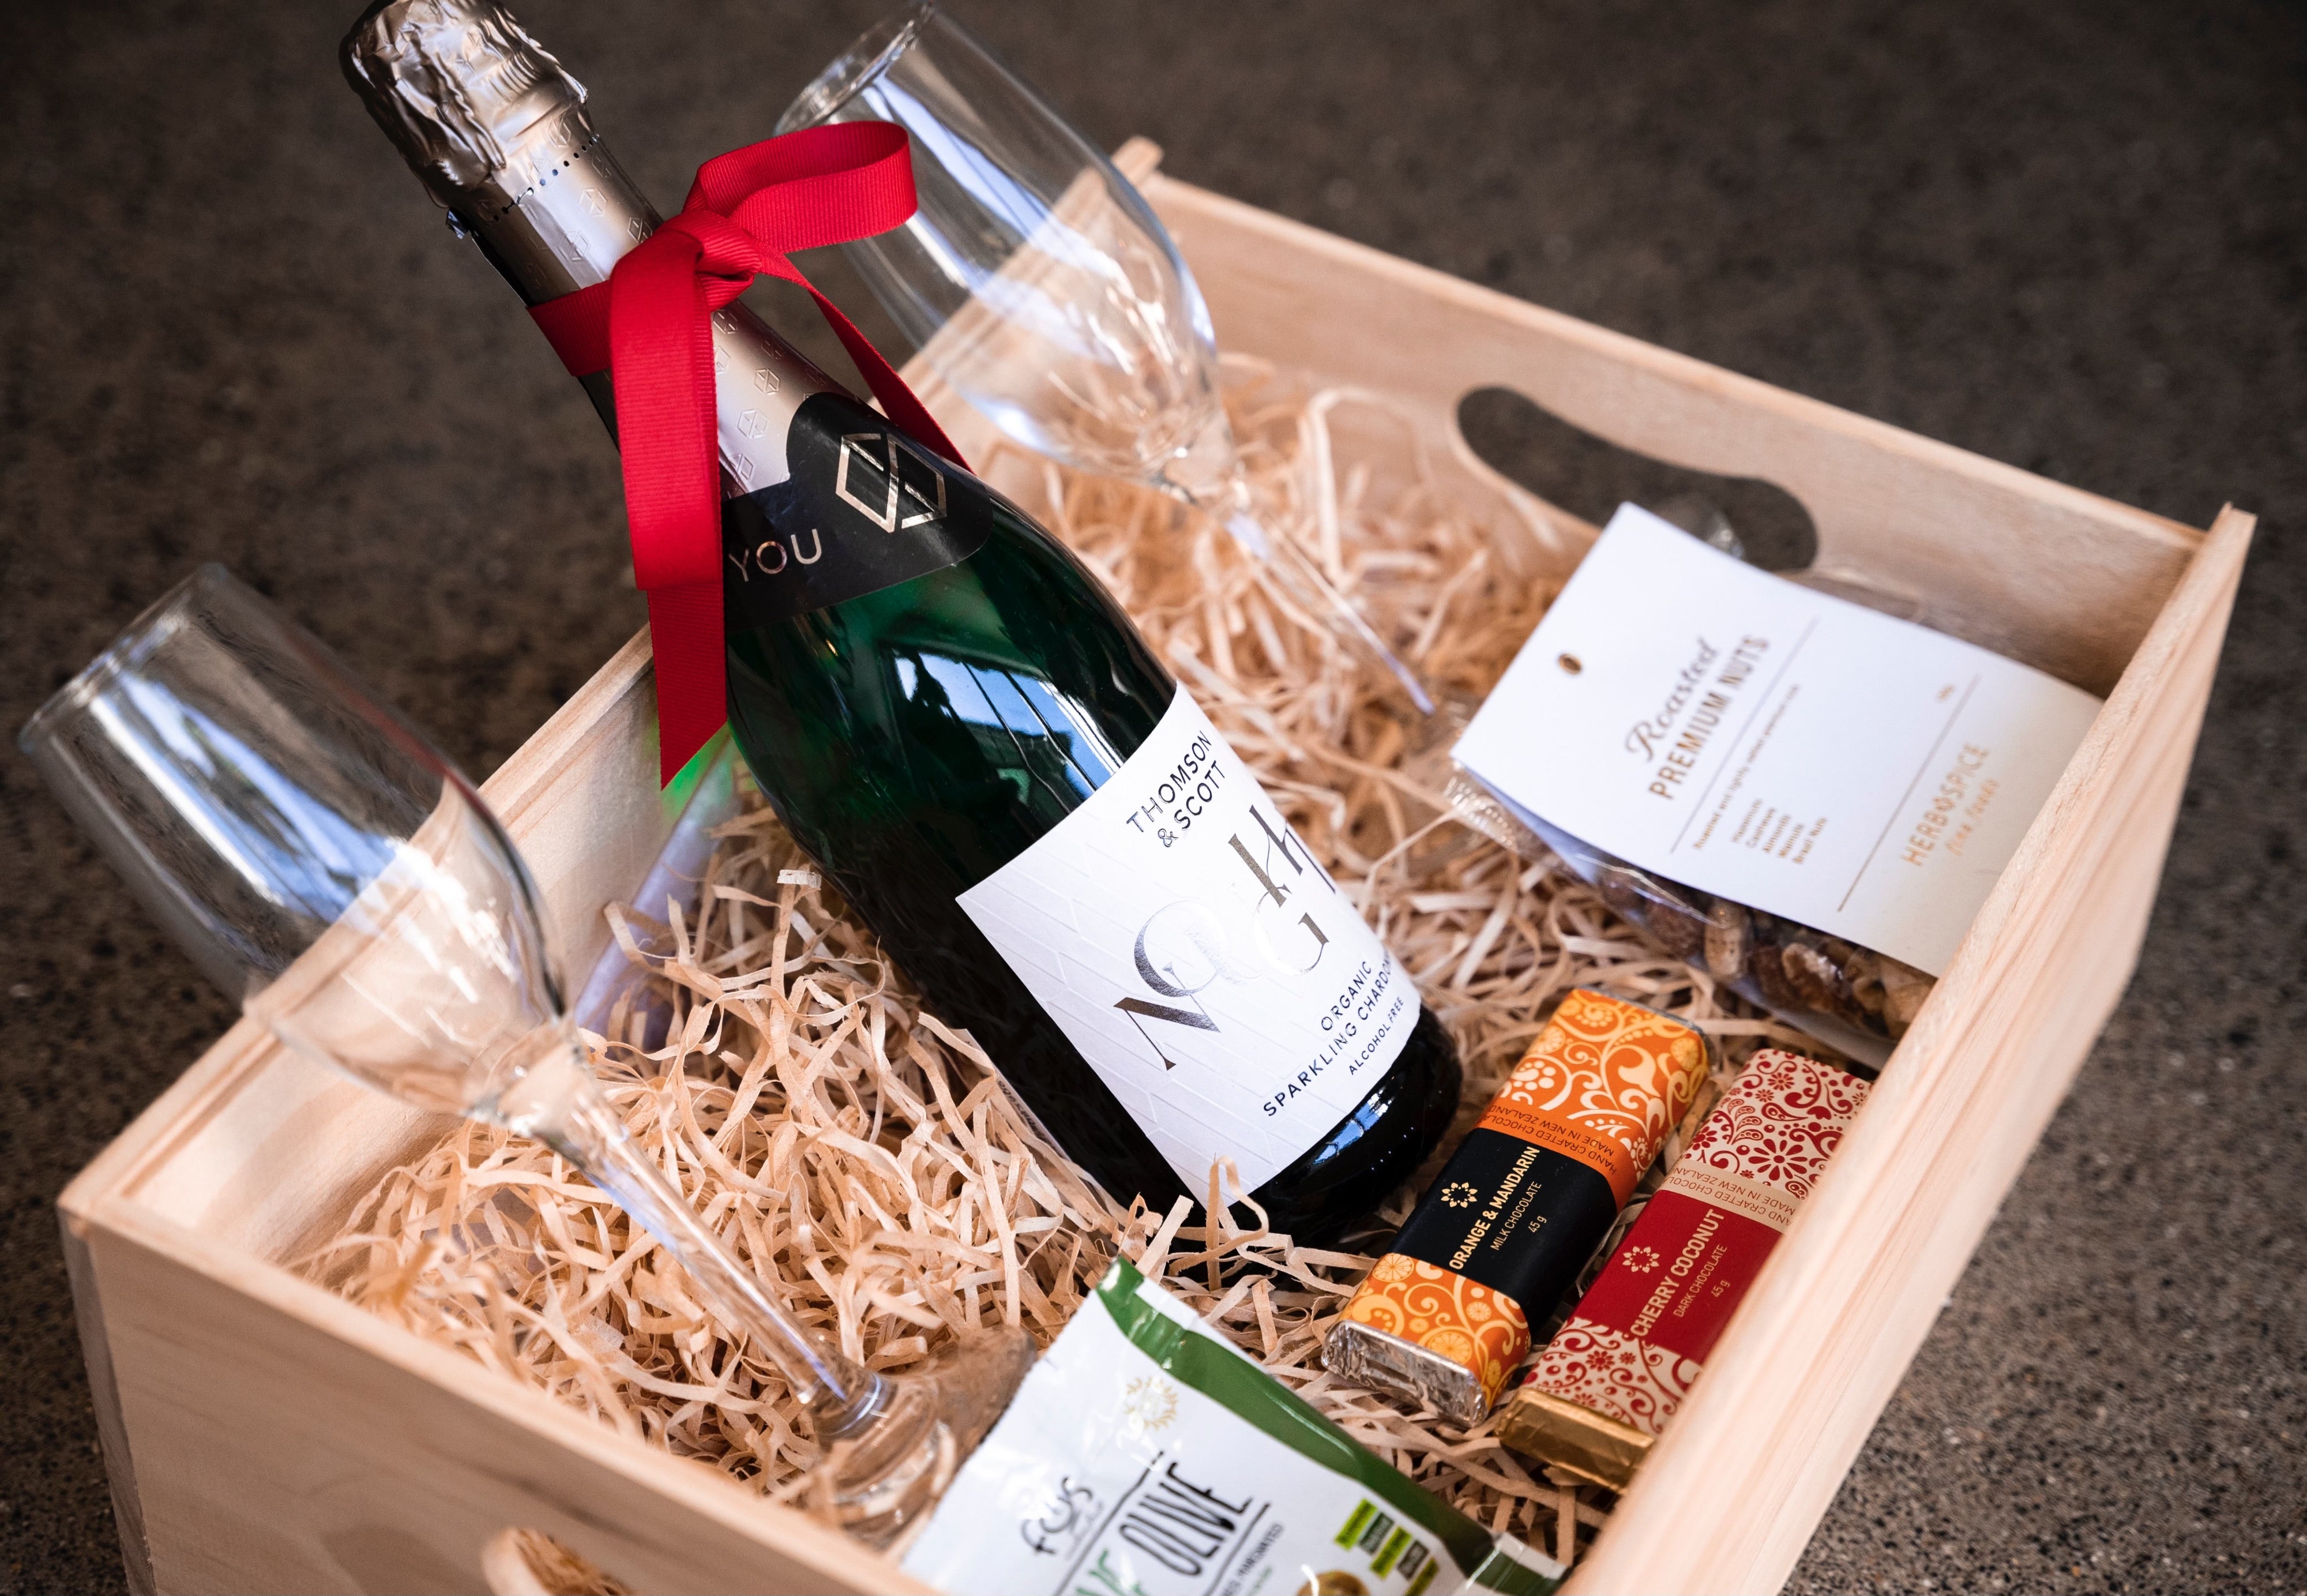 A luxurious Celebrate gift box from giftbox co. with a bottle of non-alcoholic sparkling wine adorned with a red ribbon, two elegant flutes, and an assortment of gourmet snacks carefully presented on a bed of straw.